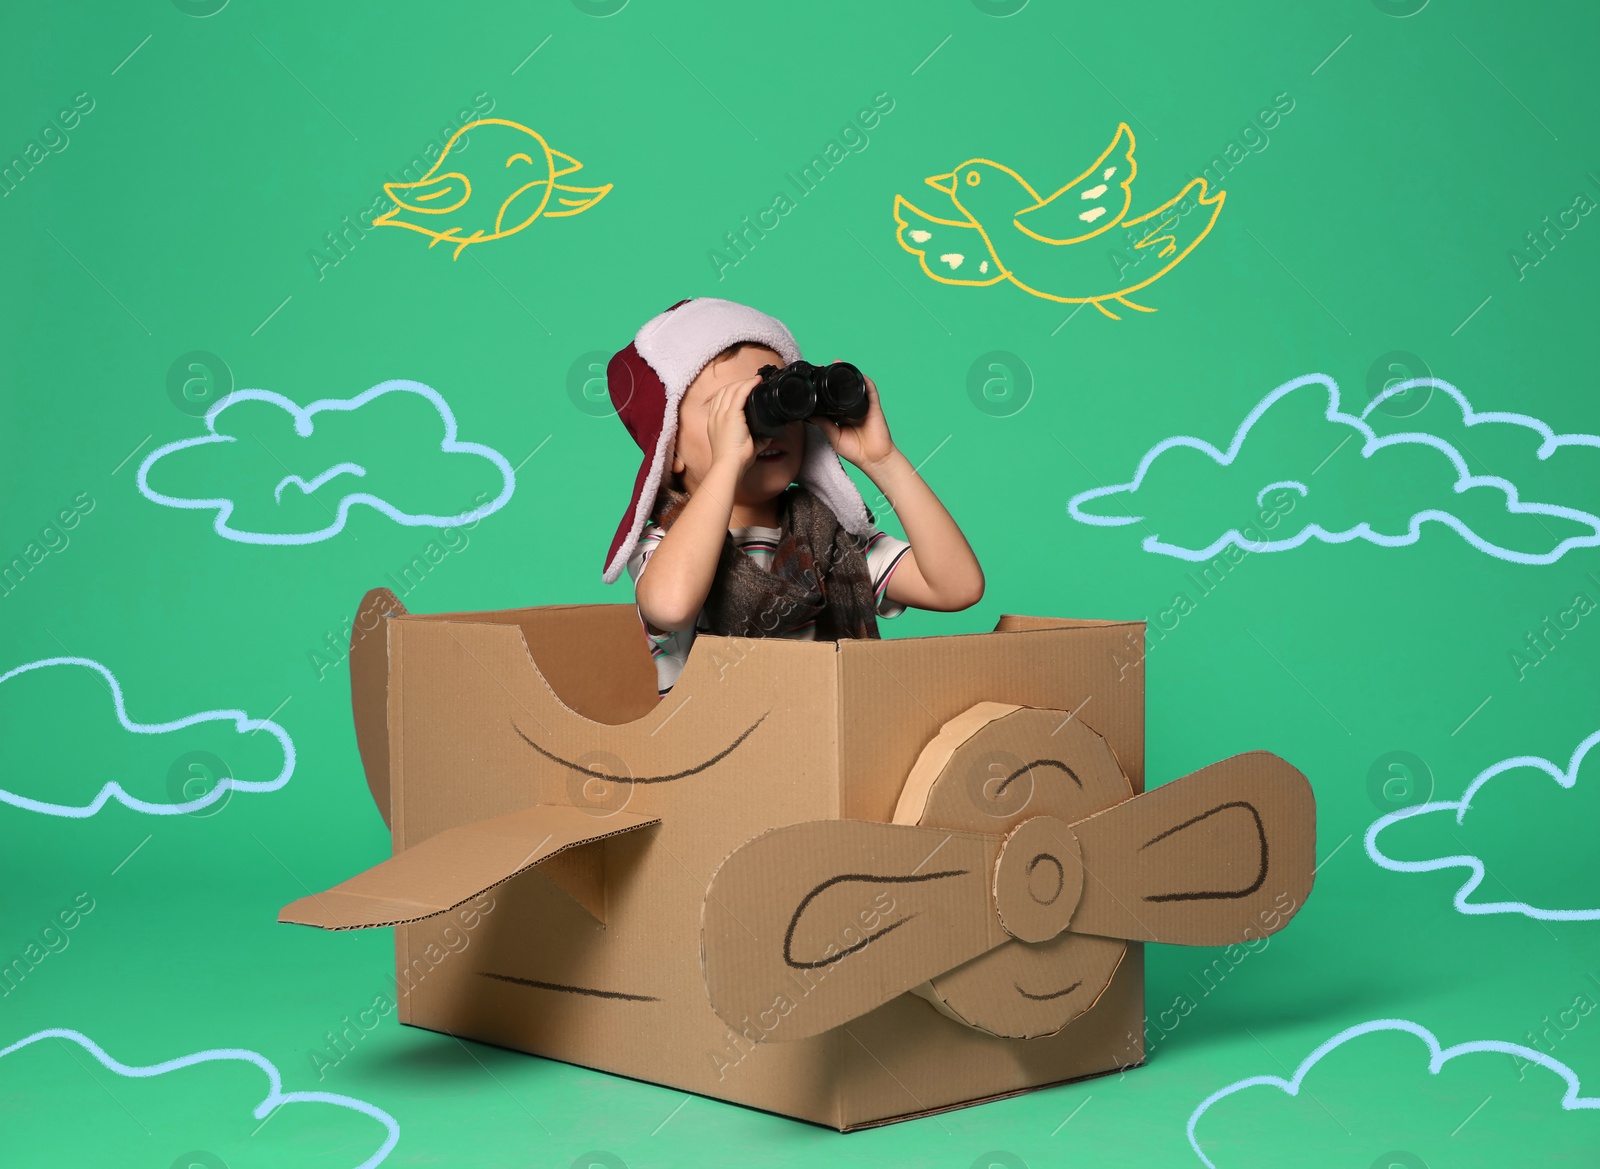 Image of Cute little child playing in cardboard airplane on green background with illustrations